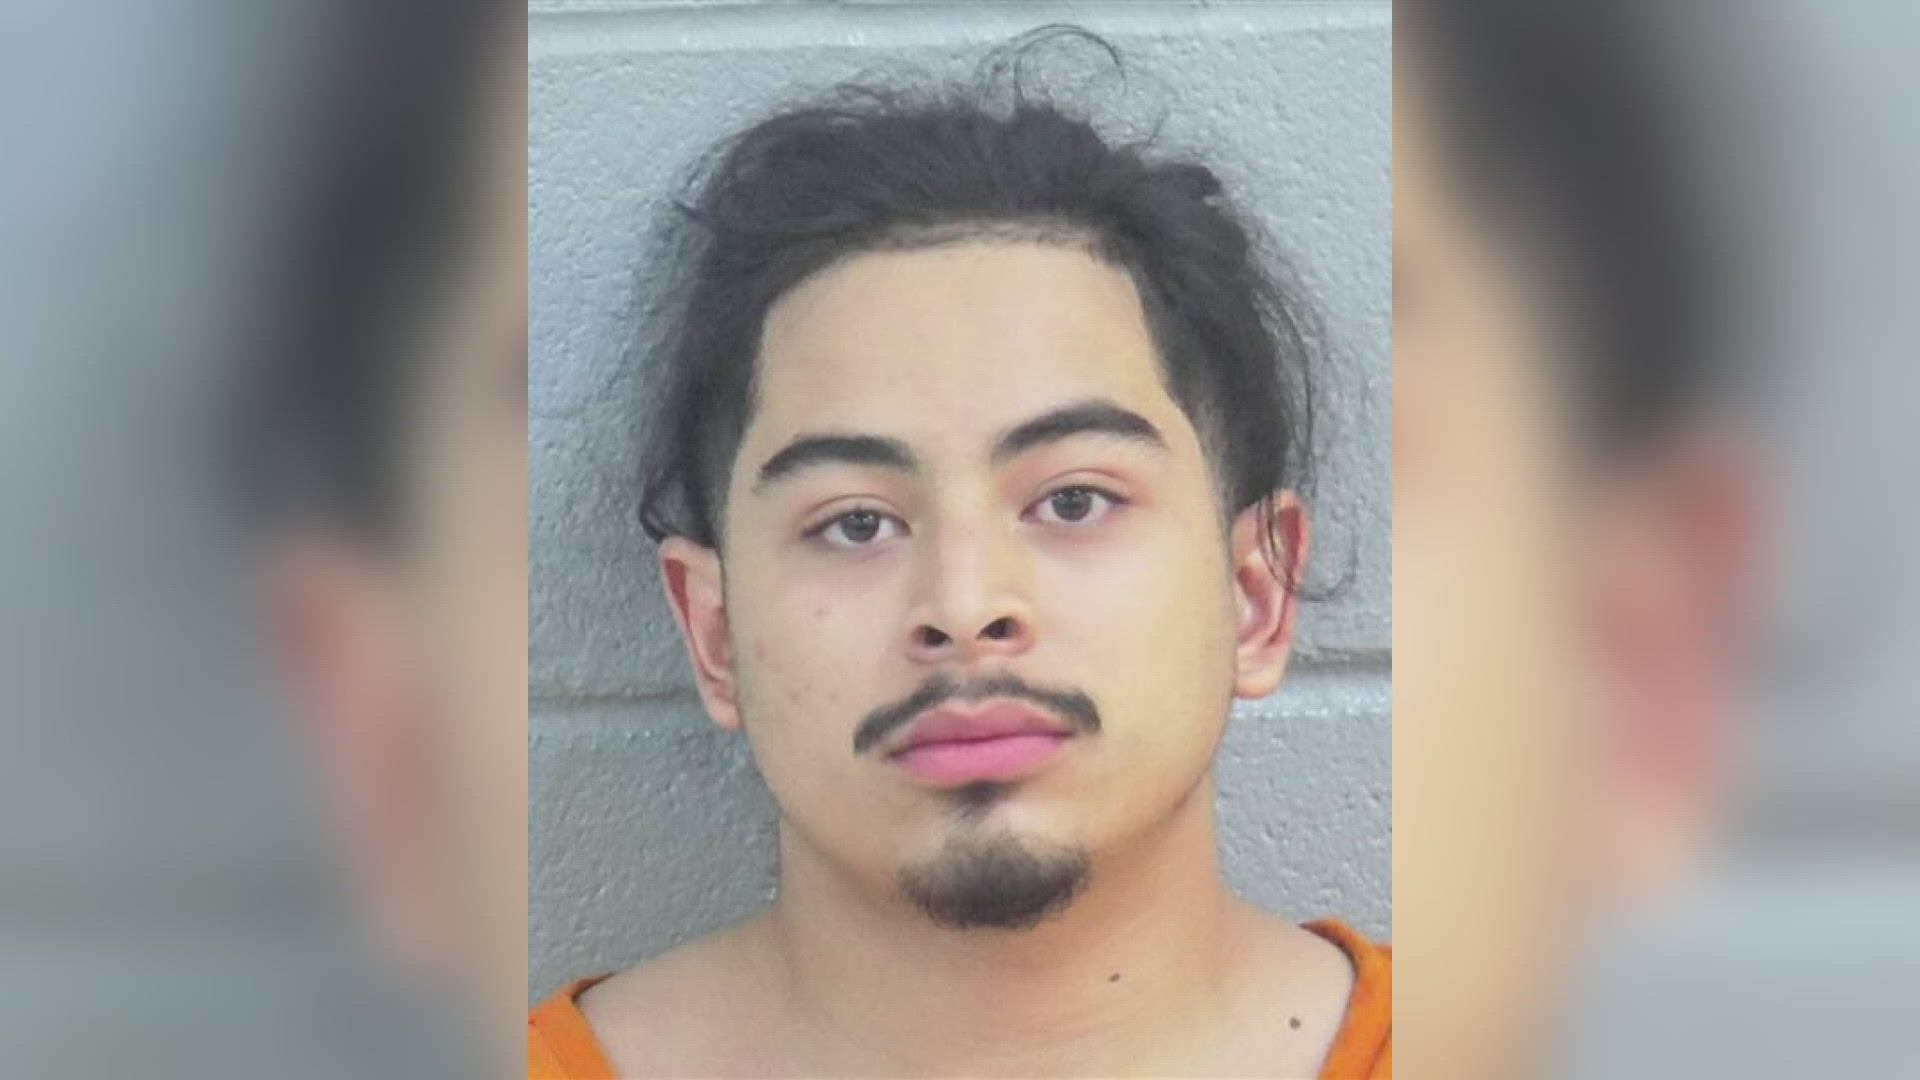 19-year-old Greg Anthony Barrera was sentenced to 60 years in prison Friday for murdering 19-year-old Samuel Anaya back in May of 2021.